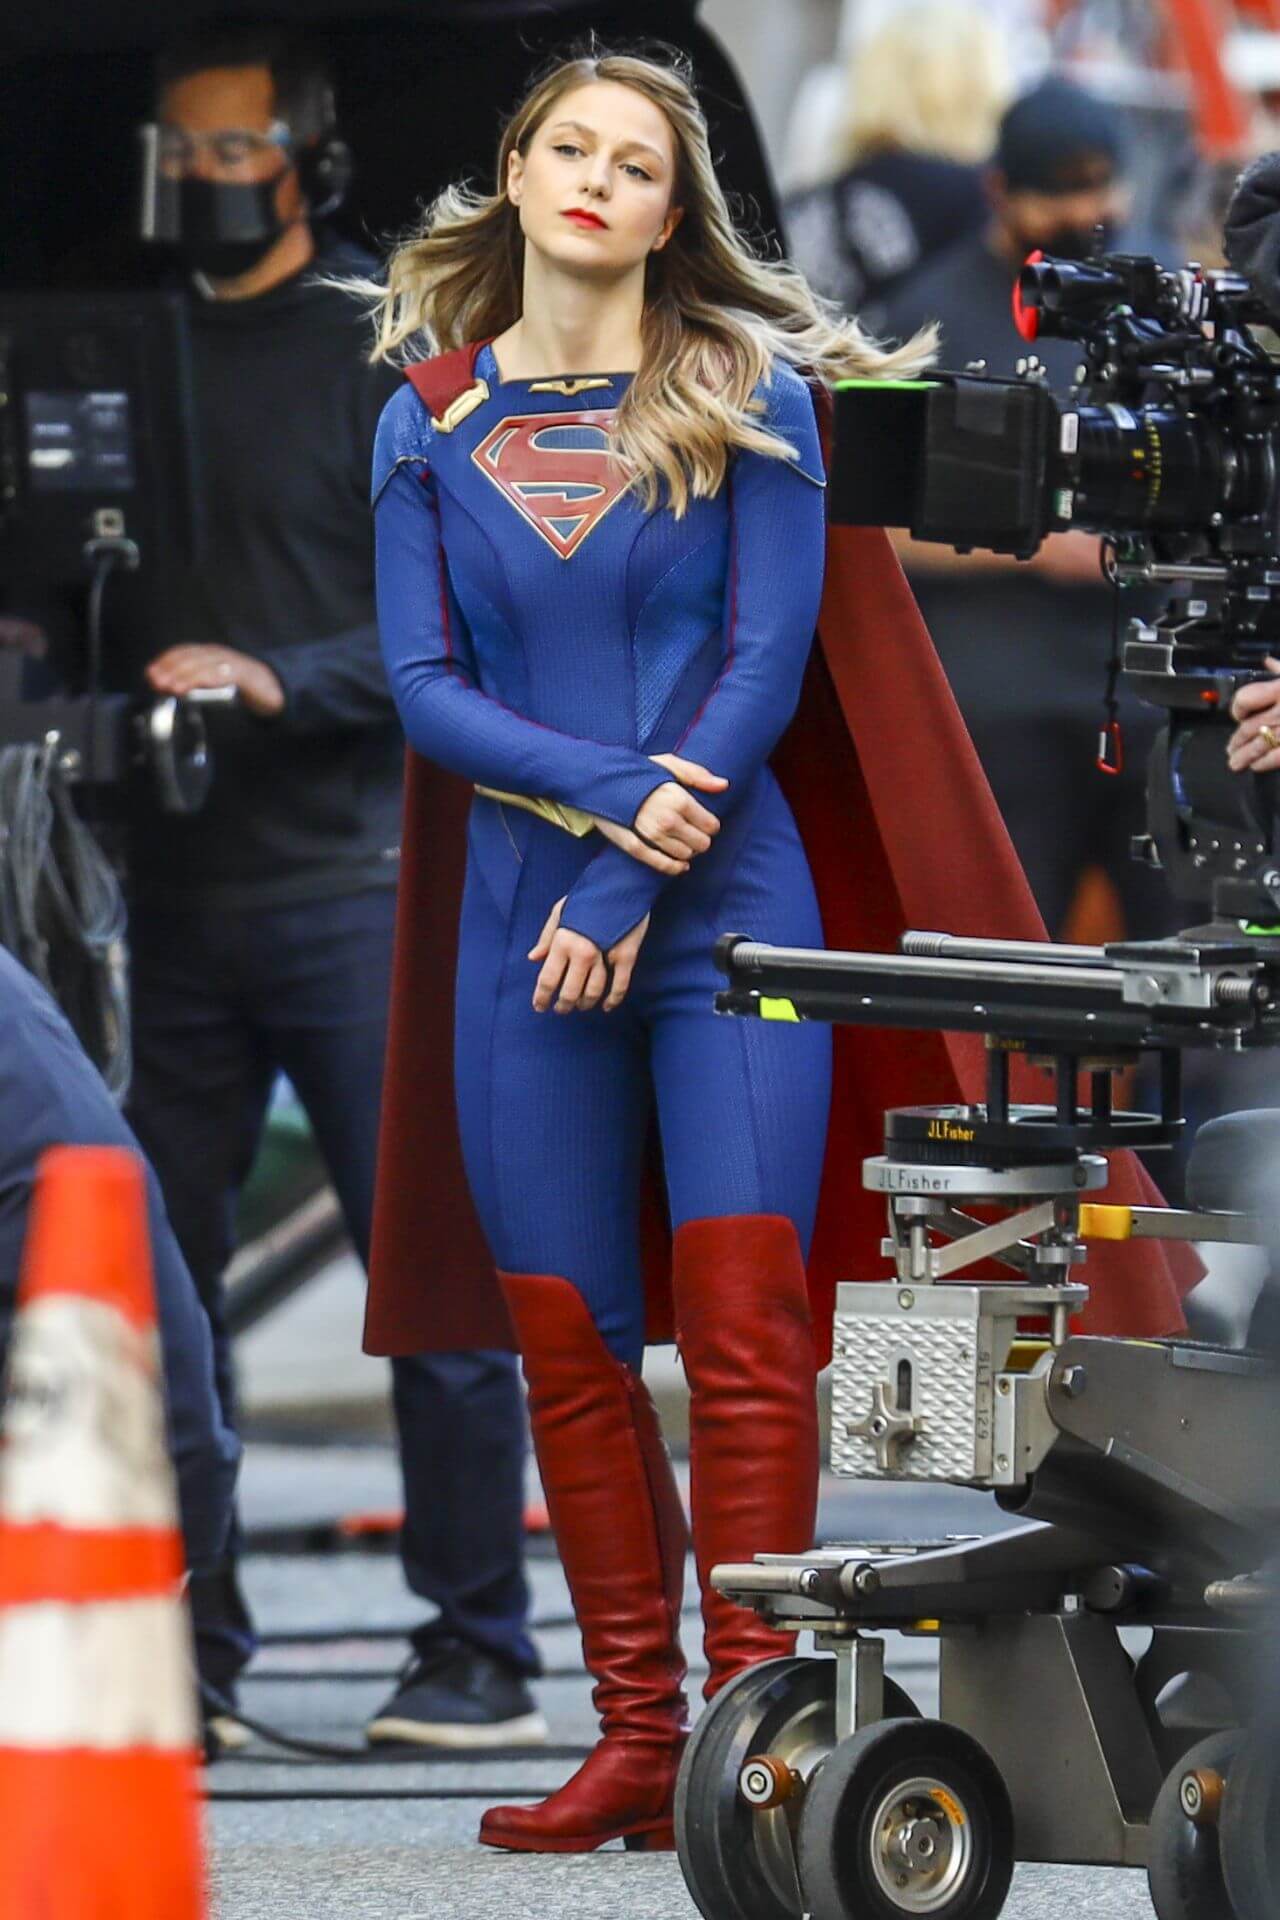 Melissa Benoist on the Set of “Supergirl” in Vancouver